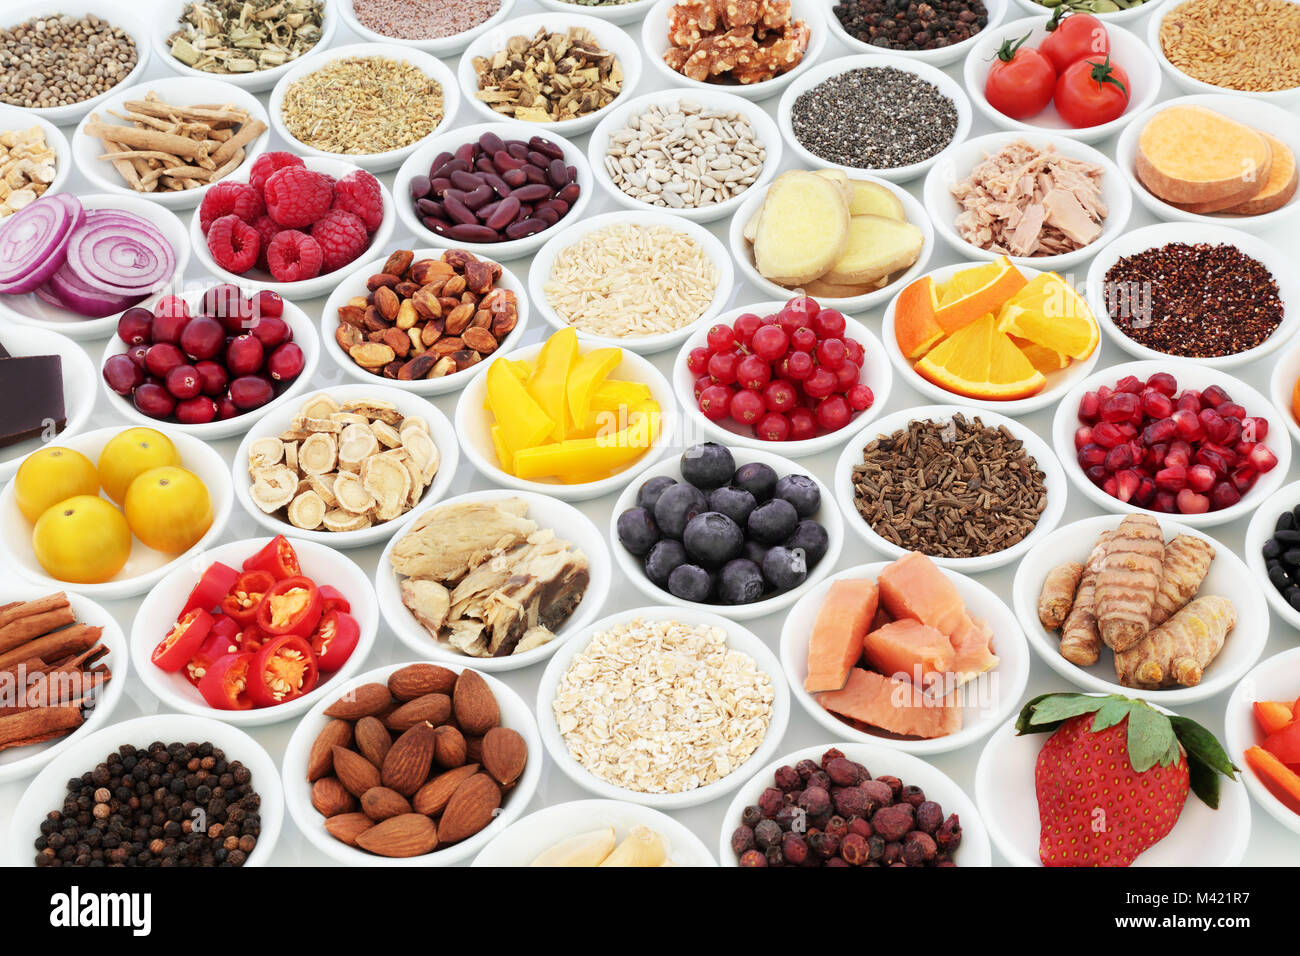 Health food for a healthy heart concept with superfood of fish, fruit, vegetables, pulses, nuts, seeds, grains, cereals with herbs and spices Stock Photo